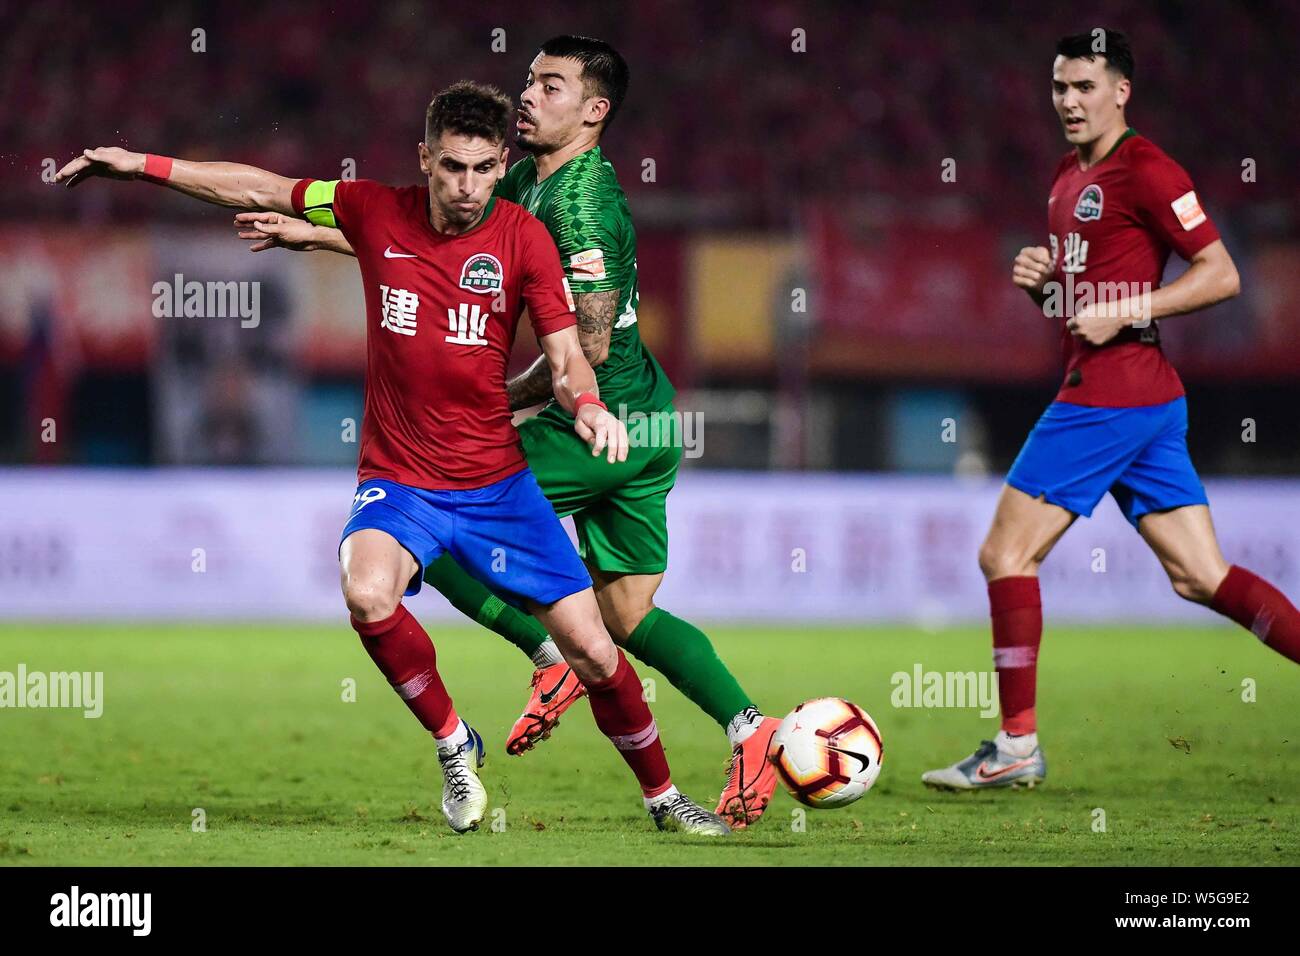 Brazilian football player Olivio da Rosa, also known as Ivo, left, of Henan Jianye passes the ball against English football player Nico Yennaris, known in China as Li Ke, of Beijing Sinobo Guoan in their 20th round match during the 2019 Chinese Football Association Super League (CSL) in Zhengzhou city, central China's Henan province, 27 July 2019. Henan Jianye defeated Beijing Sinobo Guoan 1-0. Stock Photo